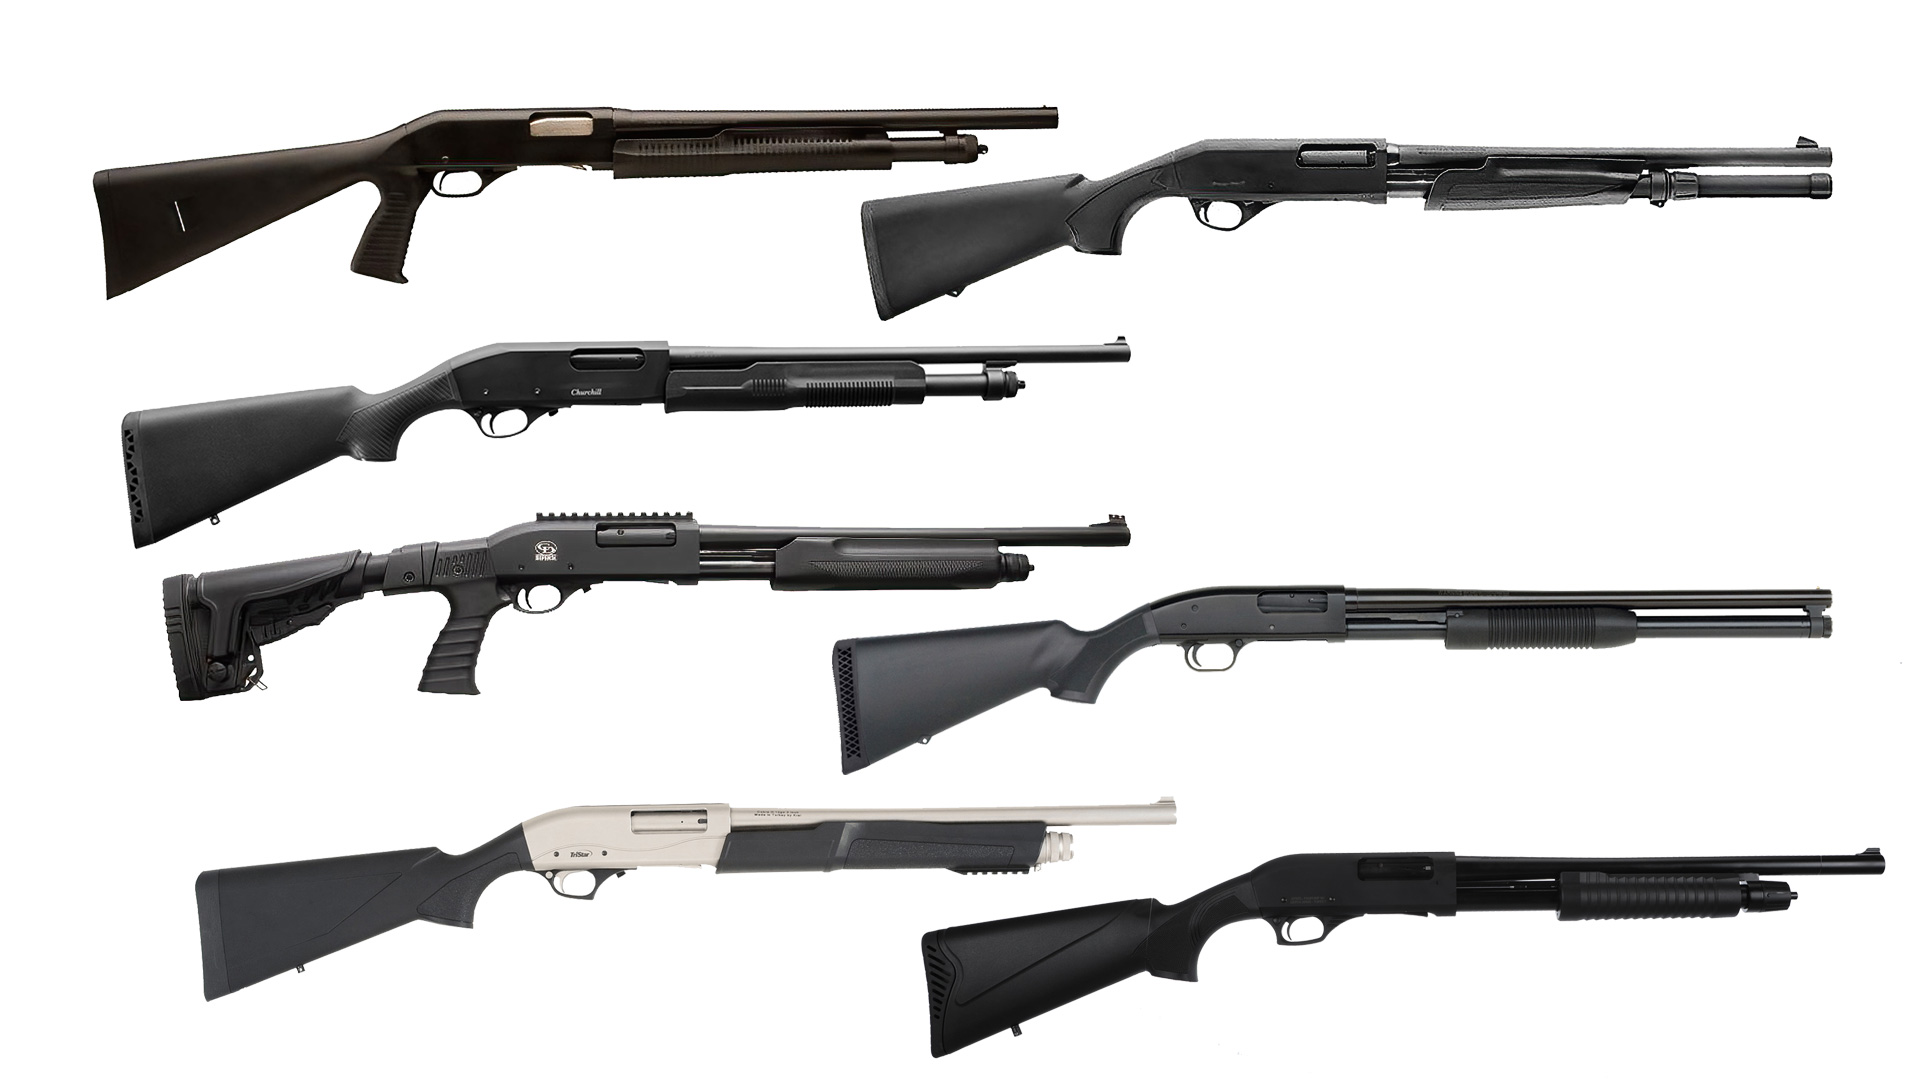 Seven Inexpensive Home Defense Shotguns | An Official Journal Of The NRA